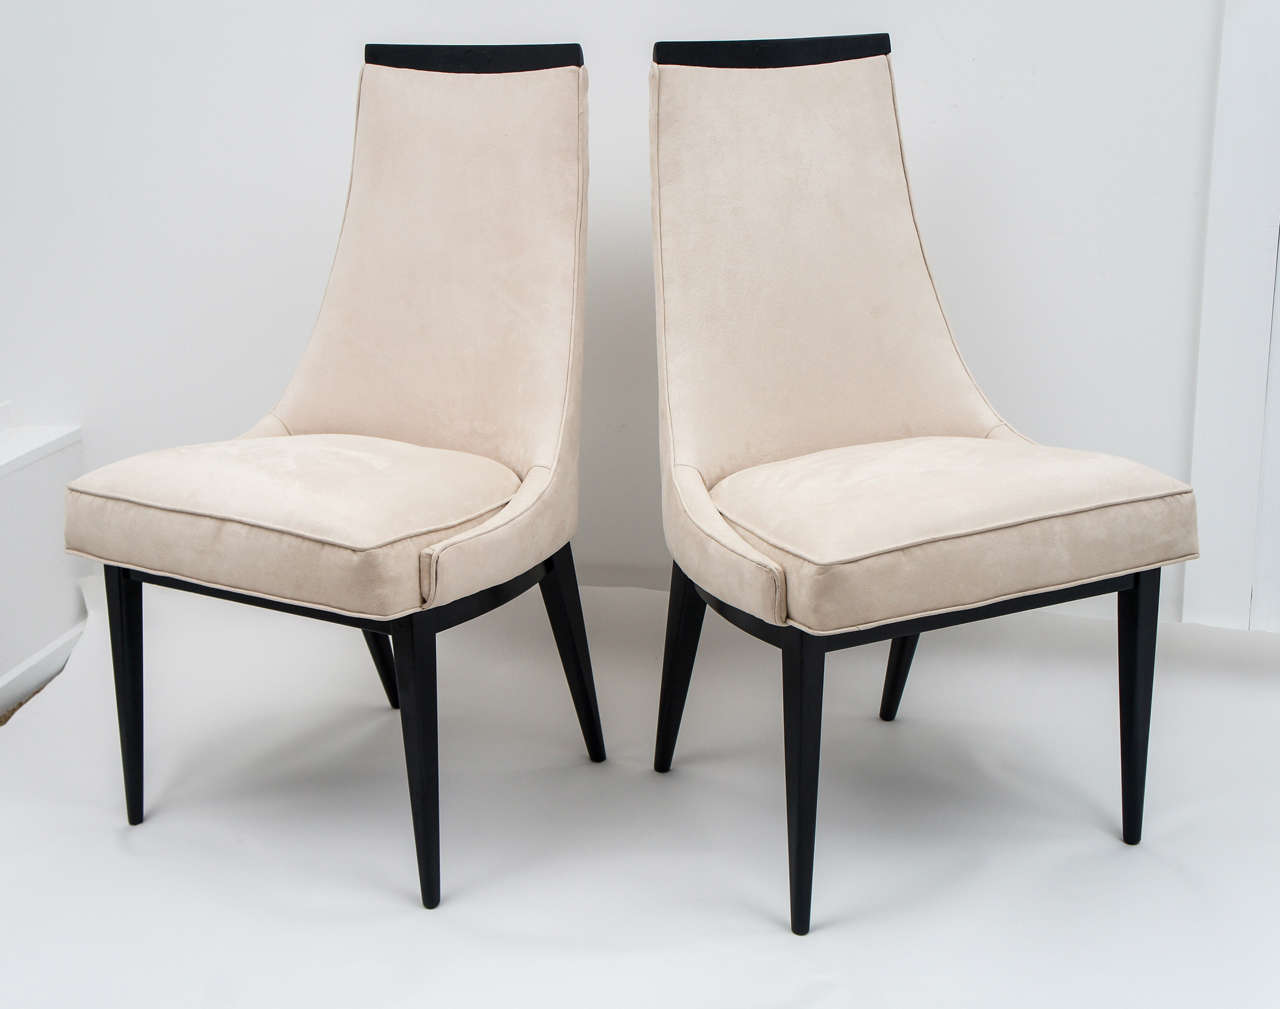 Hard to find set of dining chairs by Harvey Probber , including six side chairs and two armchairs. The wood at the top and legs have been ebonized, and the chairs have been re-upholstered in a neutral ultra-suede. We will be happy to provide